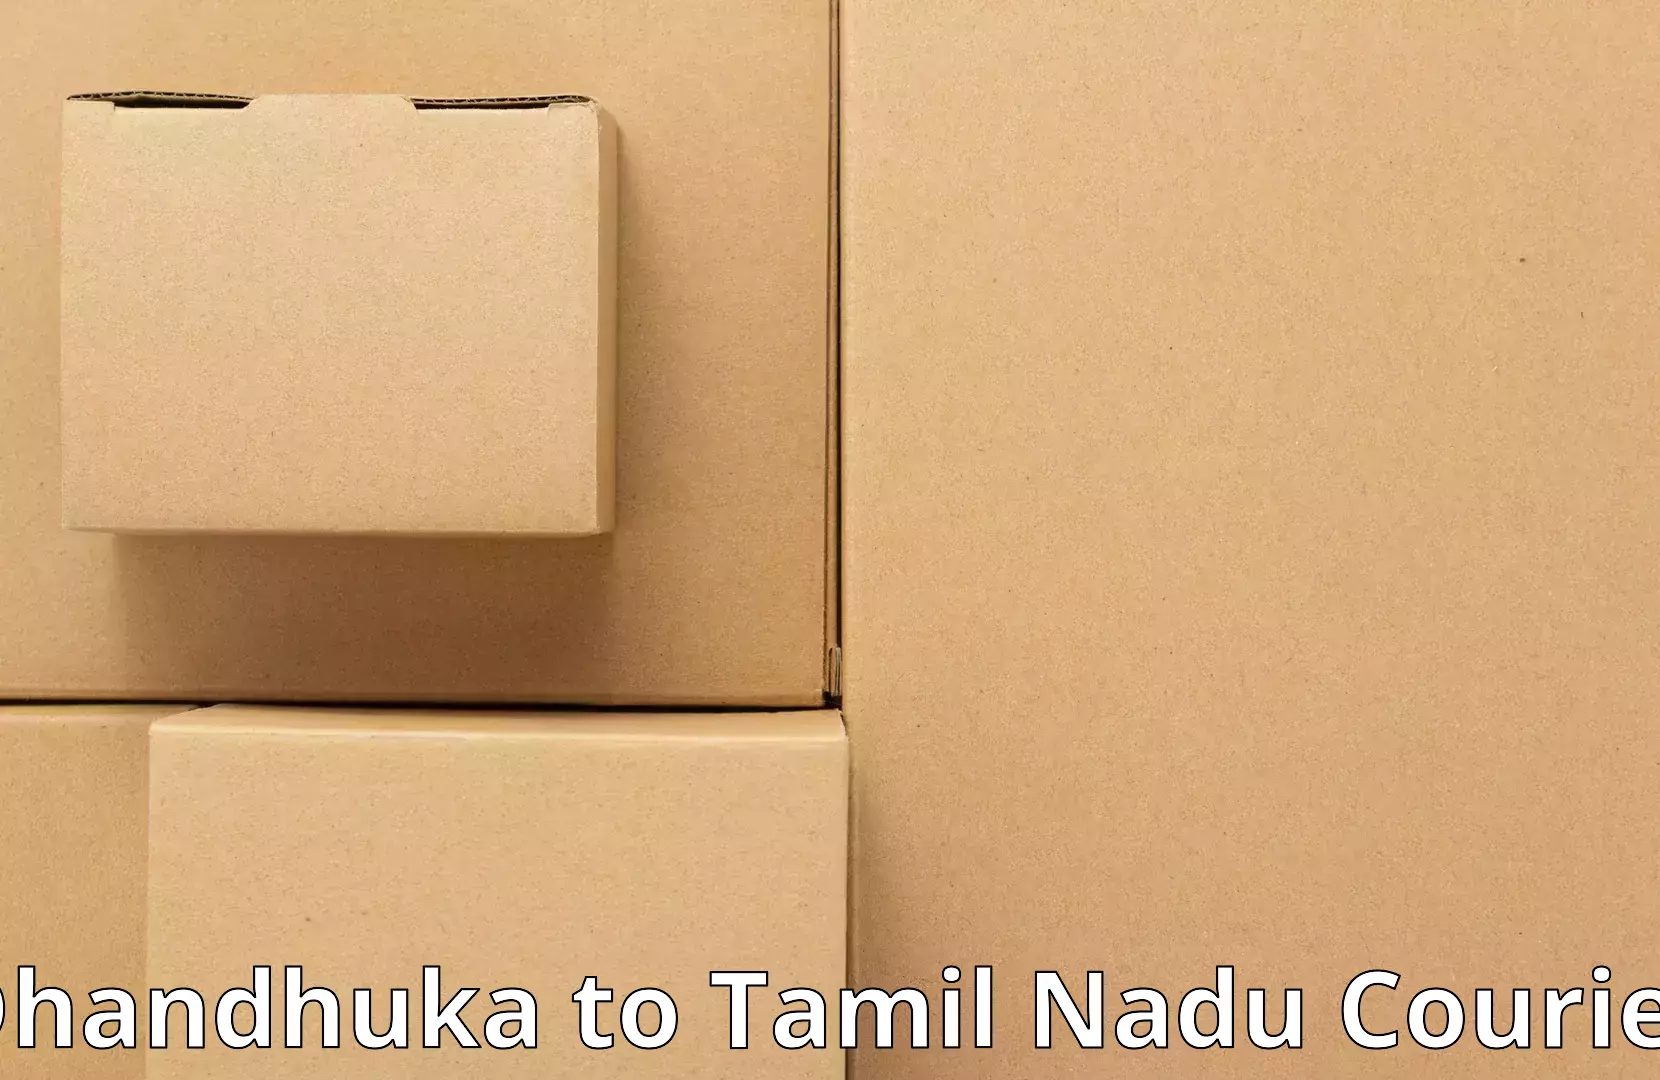 Efficient packing and moving Dhandhuka to Sri Ramachandra Institute of Higher Education and Research Chennai